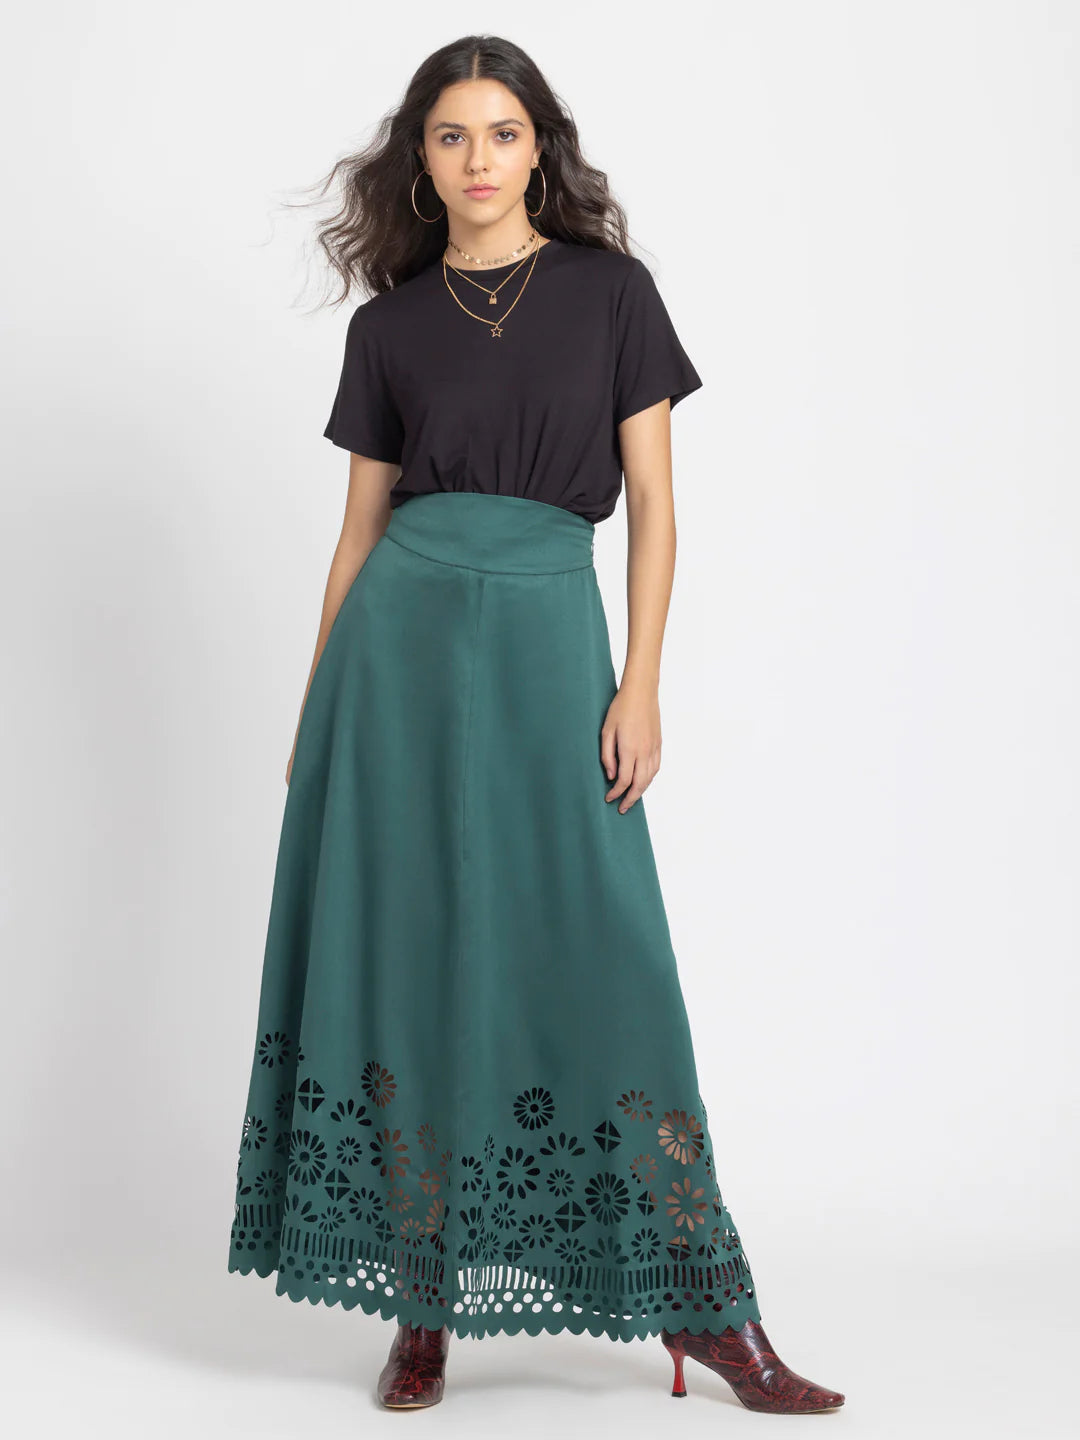 Green Party Skirt | Green Solid A-Line Party Skirt